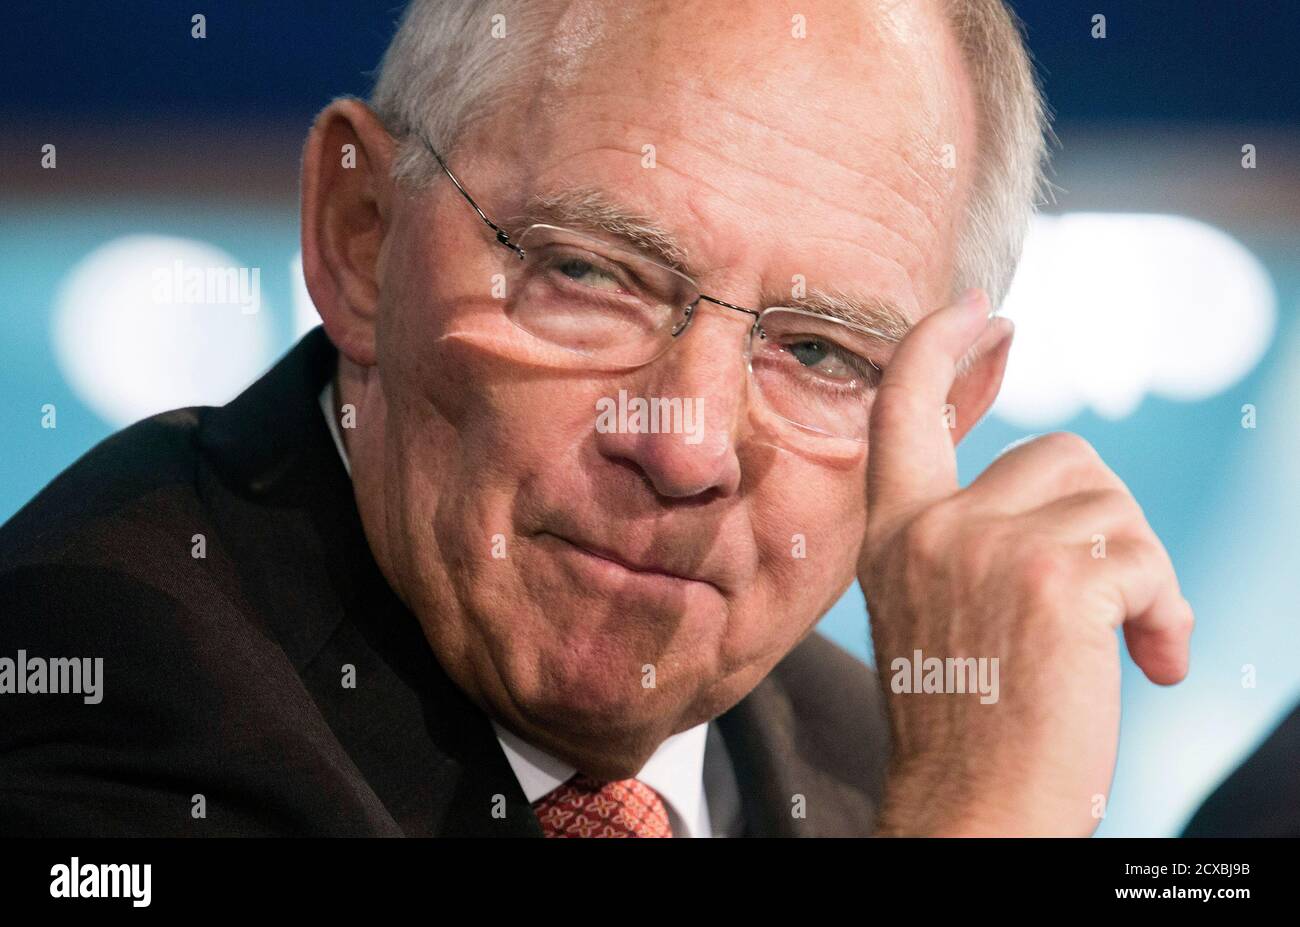 Germany's Minister of Finance Wolfgang Schauble speaks during a discussion on 'A Reform Agenda for Europe's Leaders' during the World Bank/IMF annual meetings in Washington October 9, 2014. Schaeuble said on Thursday more government spending was a wrong cure for the euro zone's weak growth and dismissed the prospect of recession for Europe's biggest economy.     REUTERS/Joshua Roberts    (UNITED STATES - Tags: POLITICS BUSINESS) Stock Photo